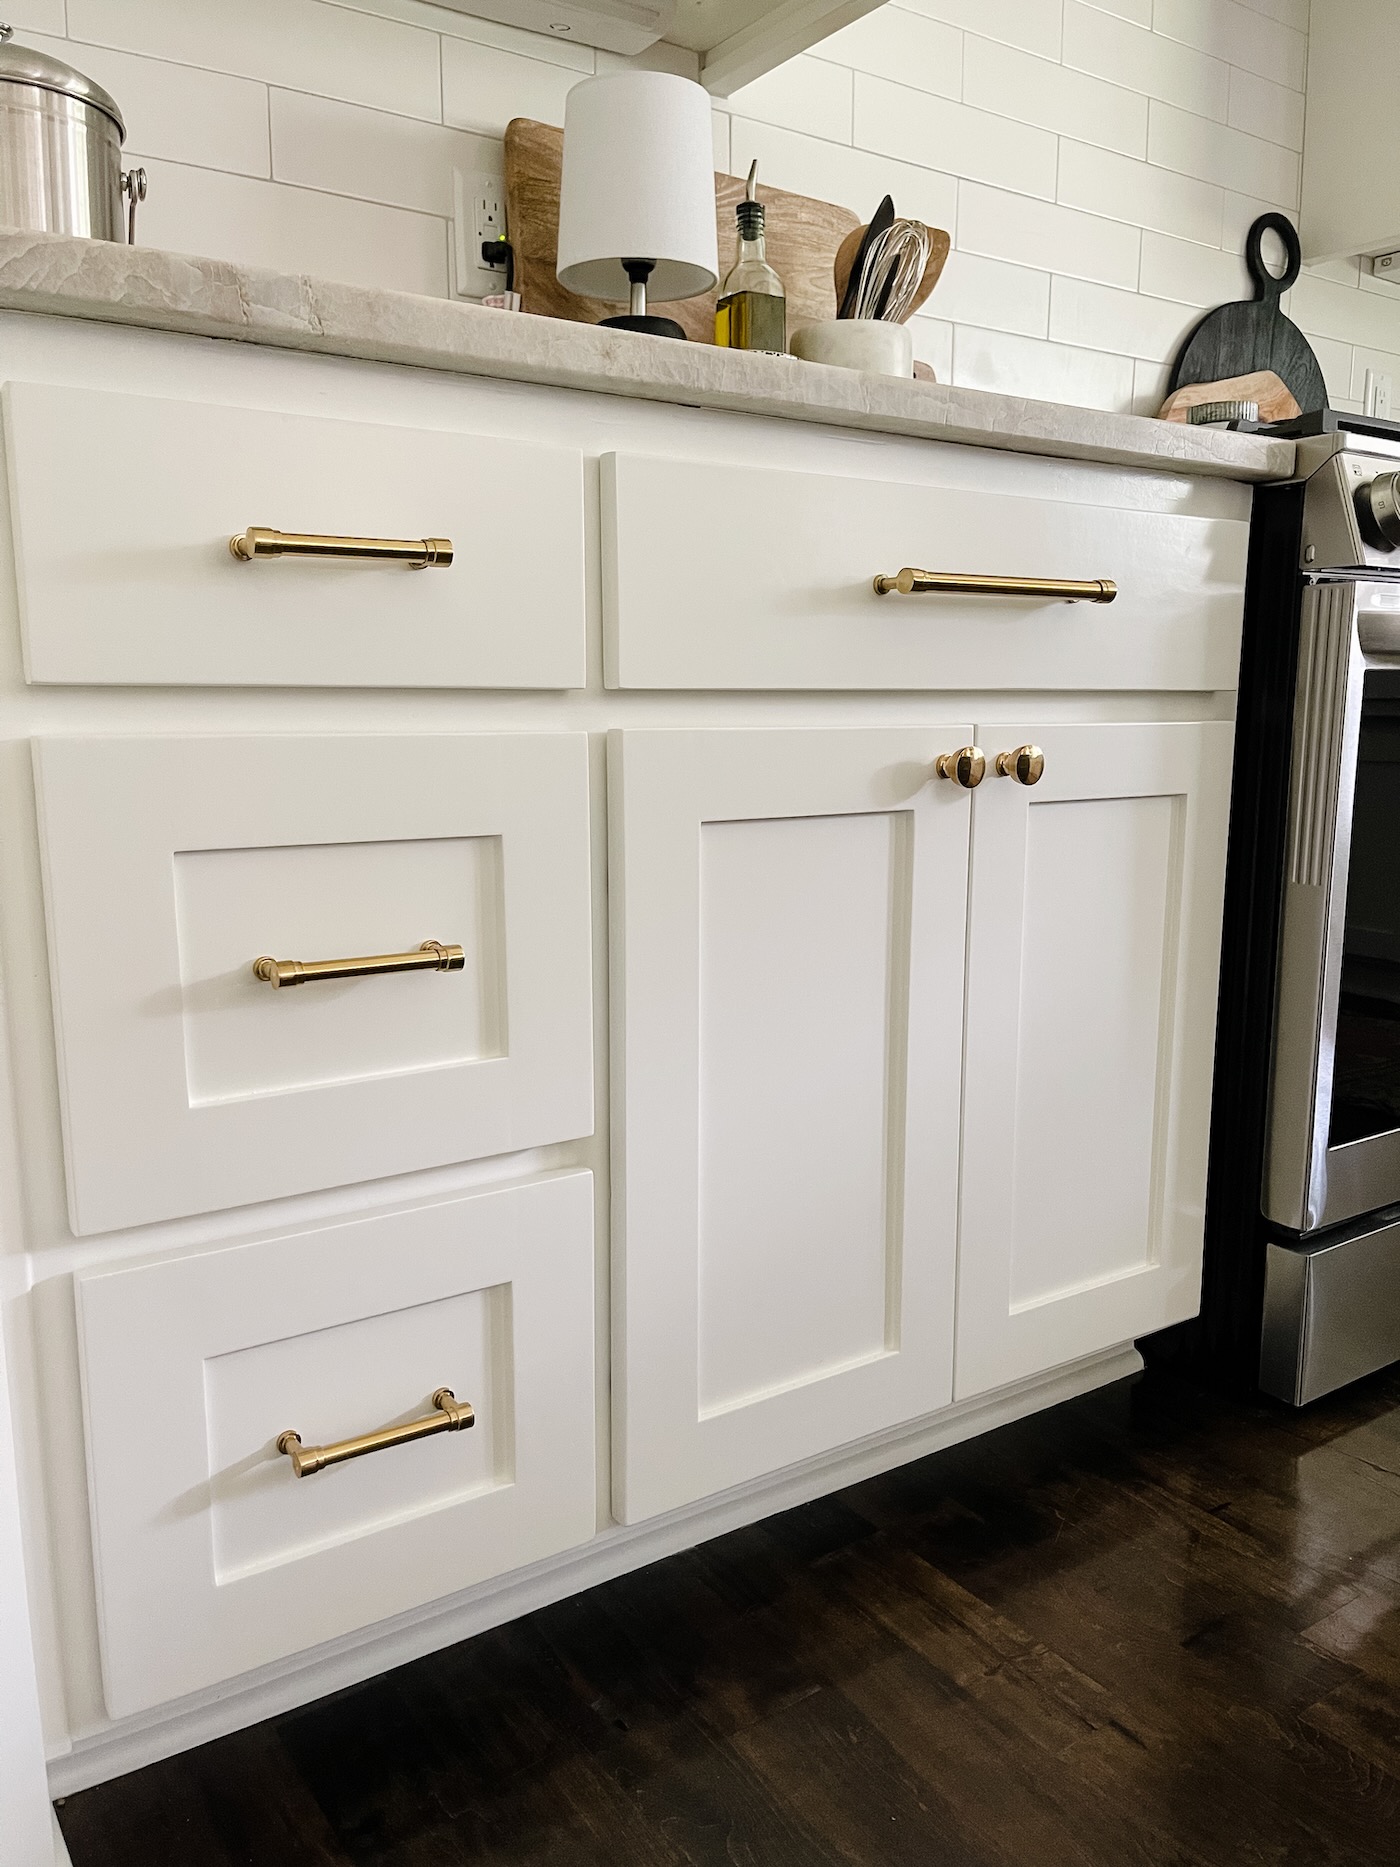 What is the difference between brass finishes in cabinet hardware